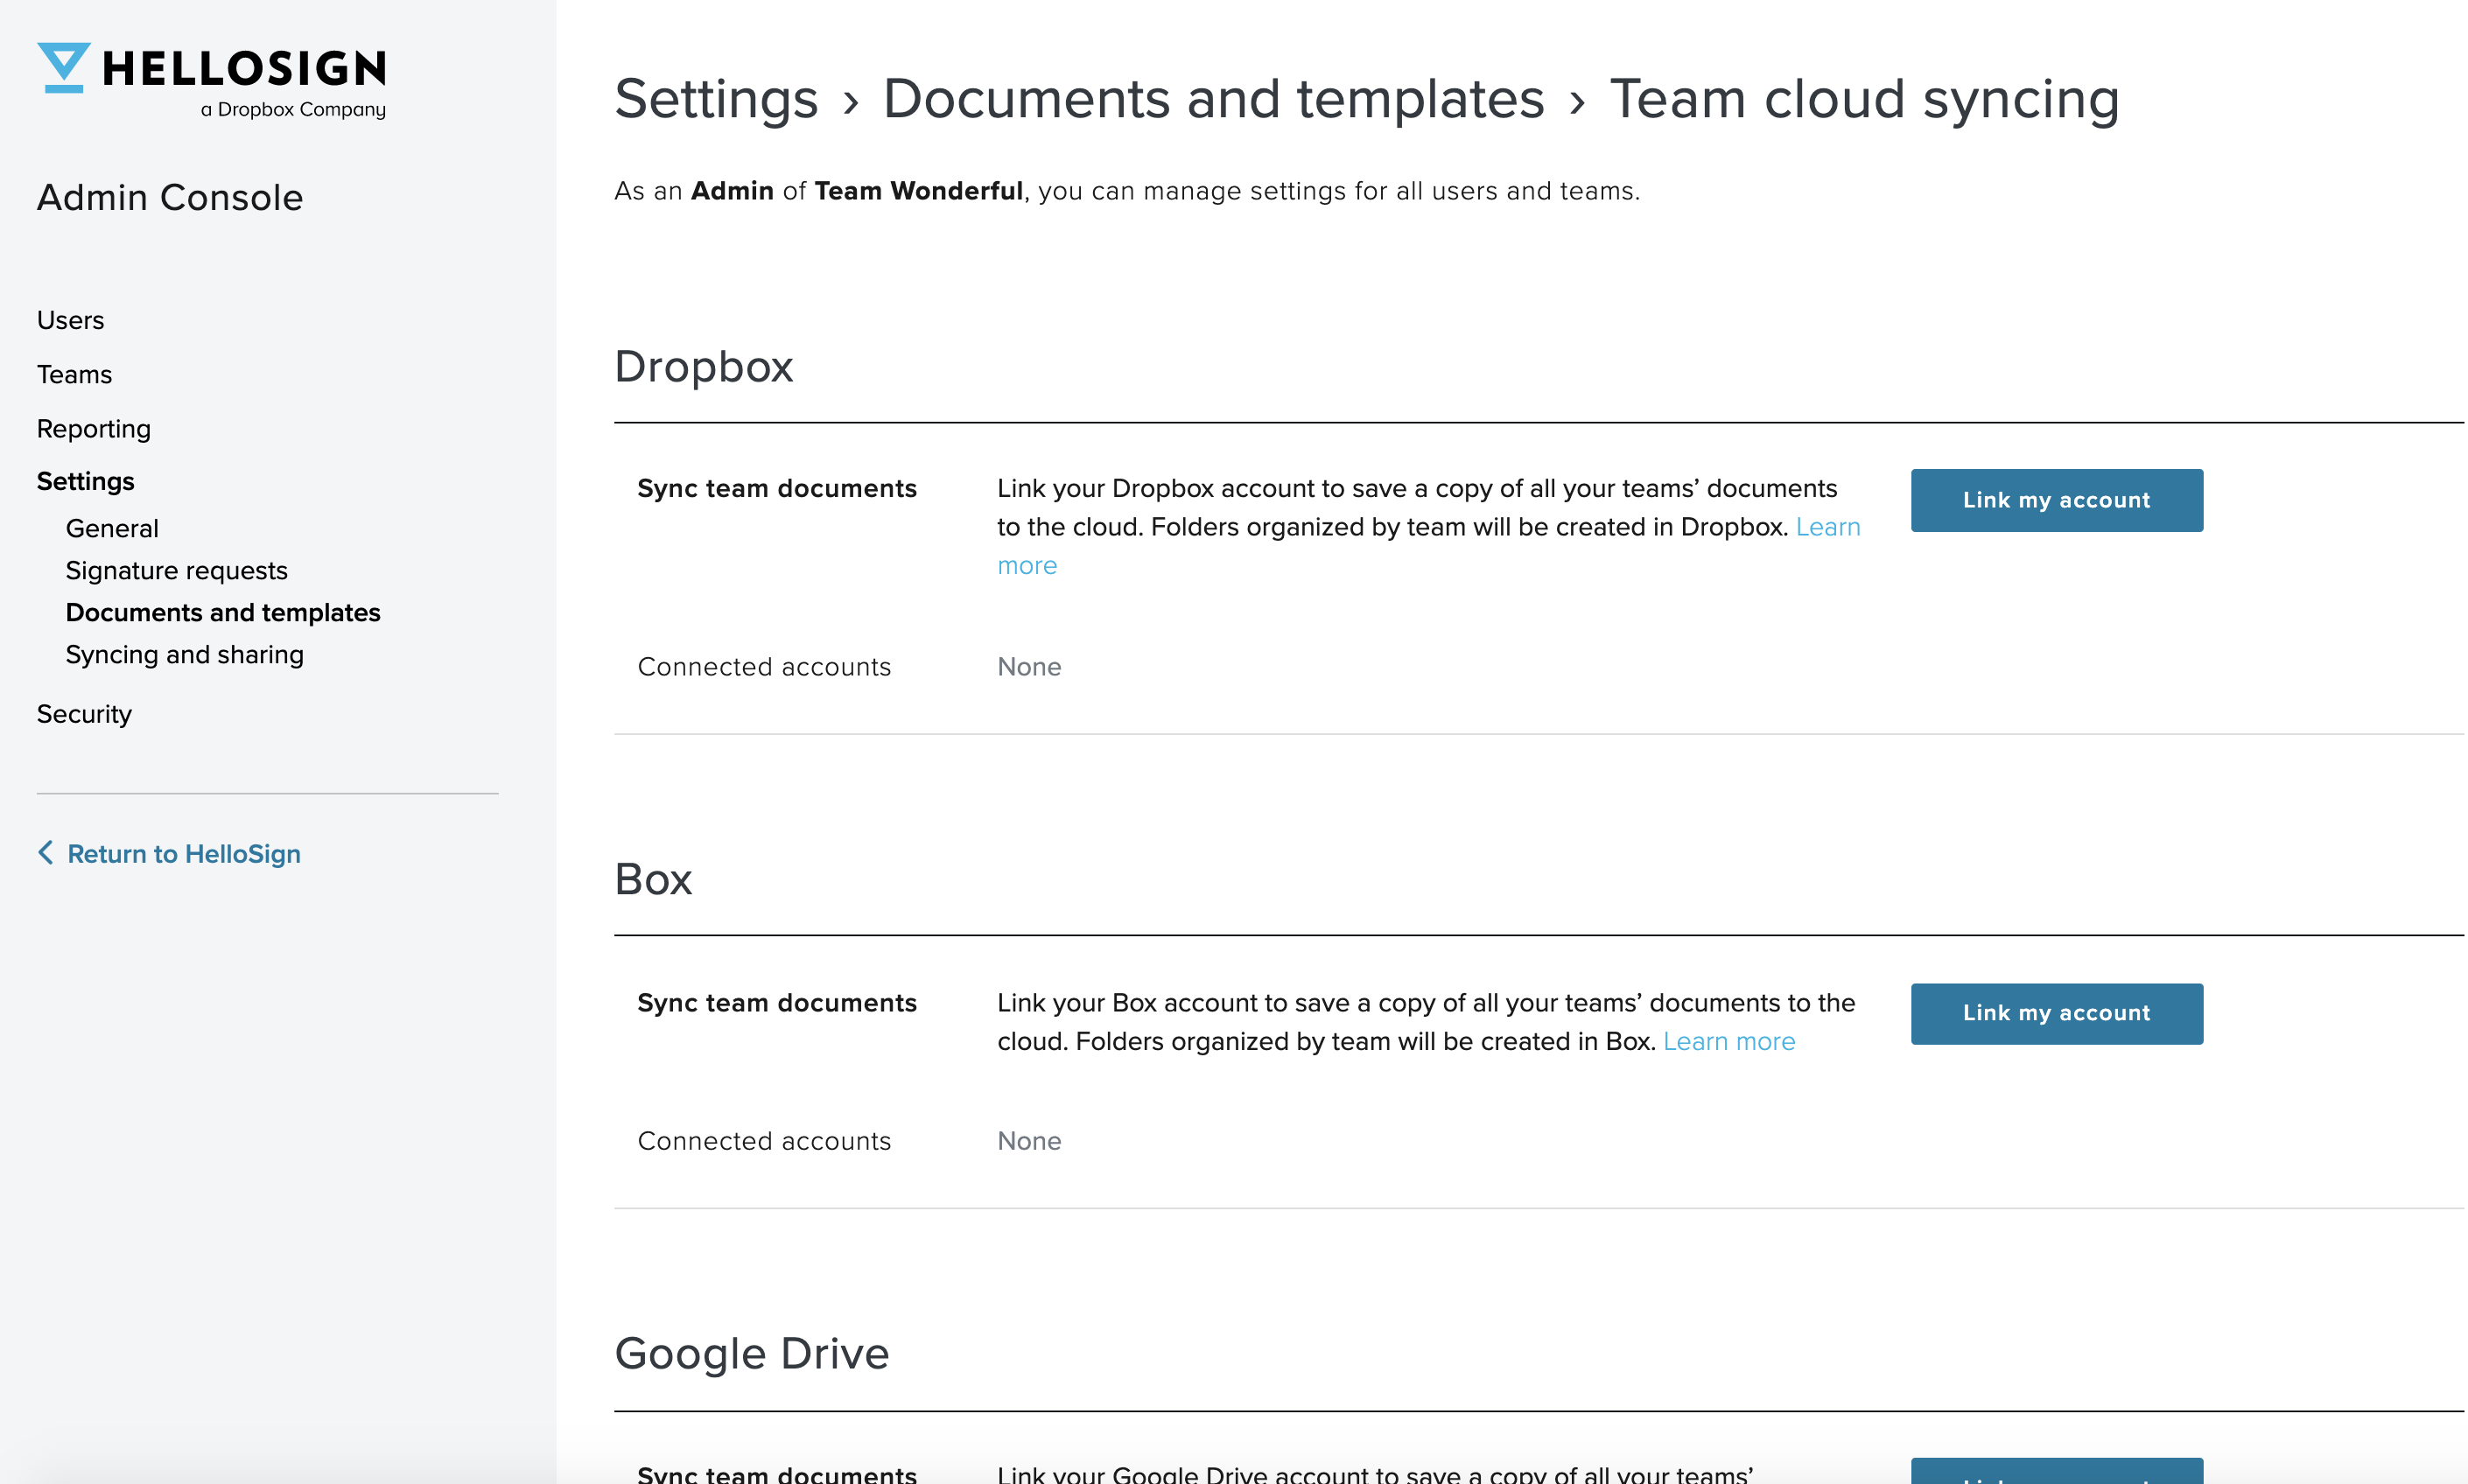 Set up team cloud syncing in the admin console